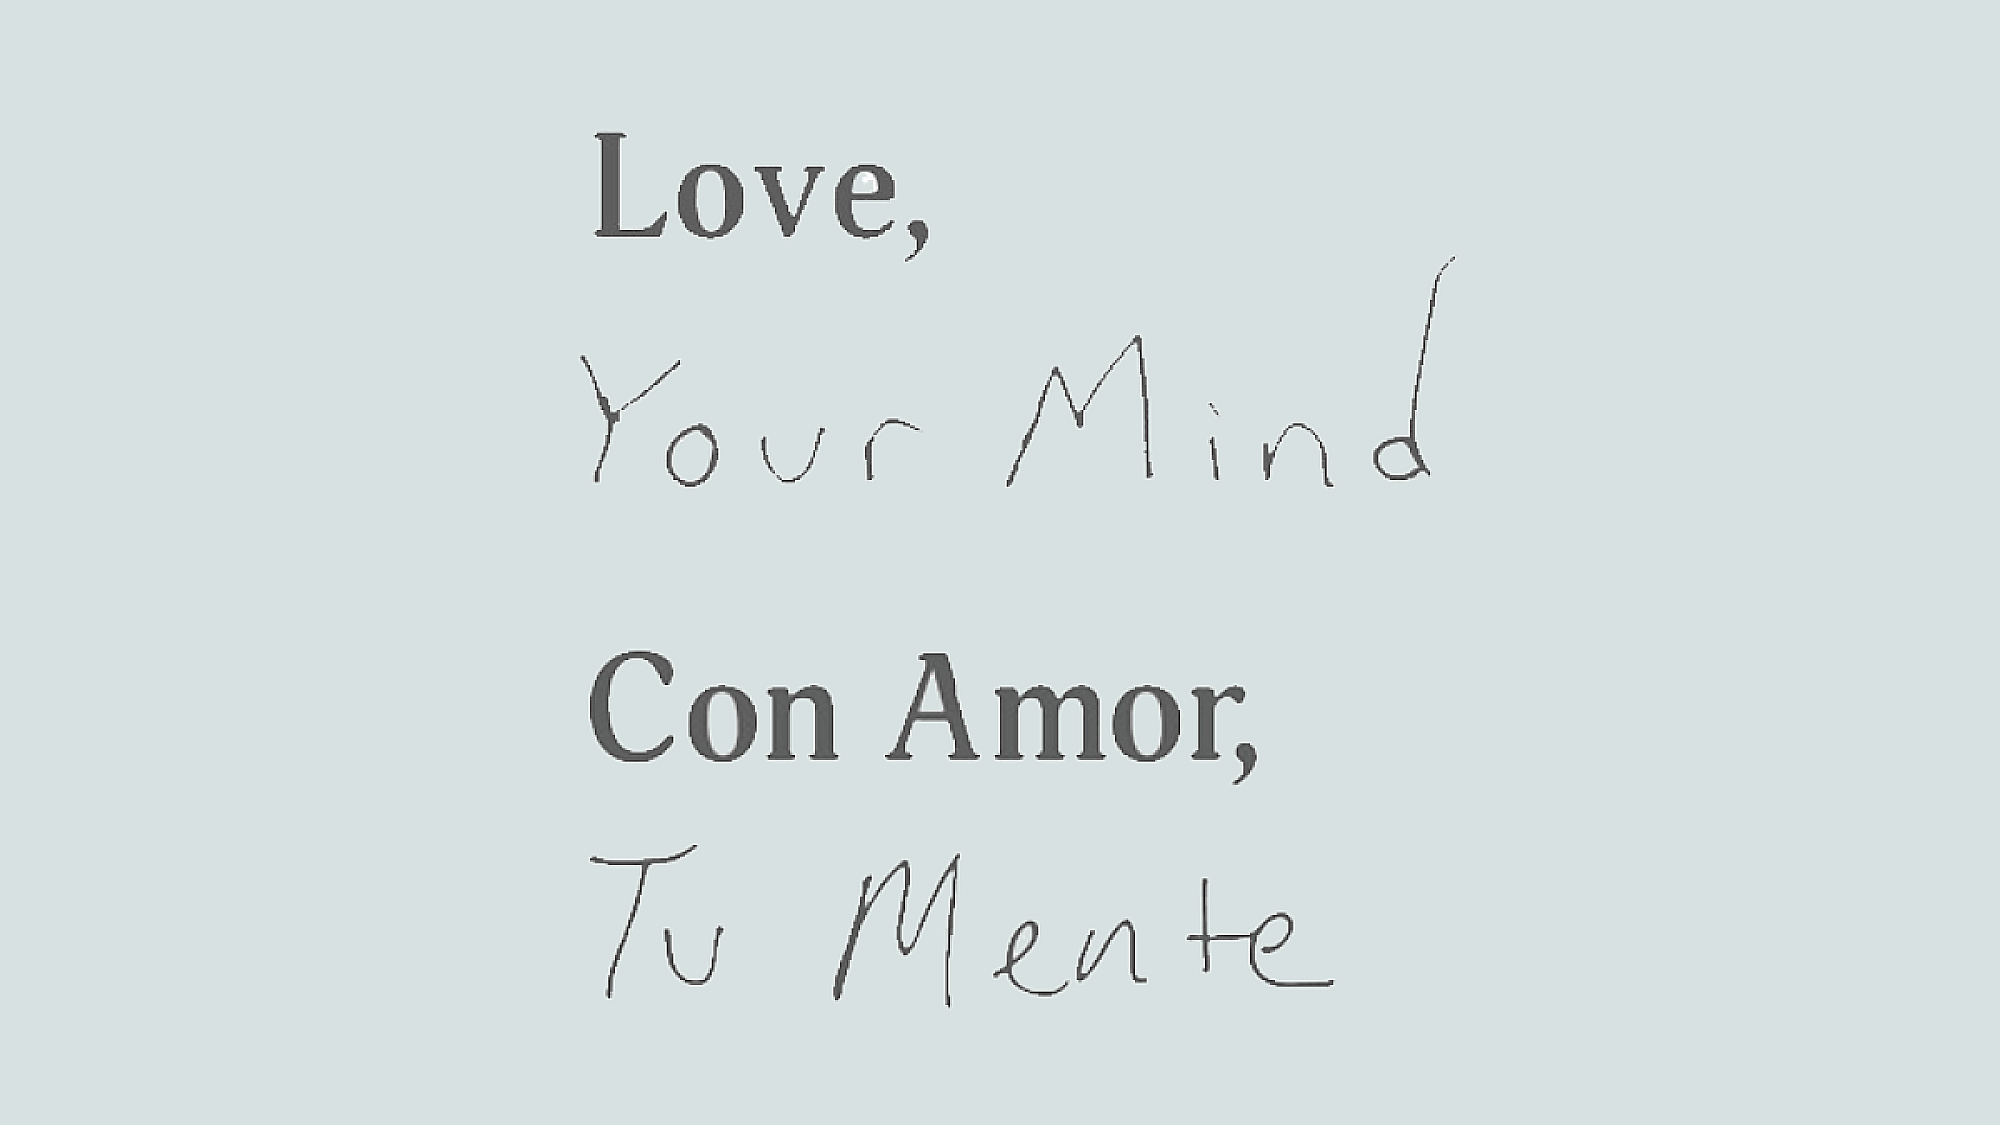 love, your mind campaign logos in english and español